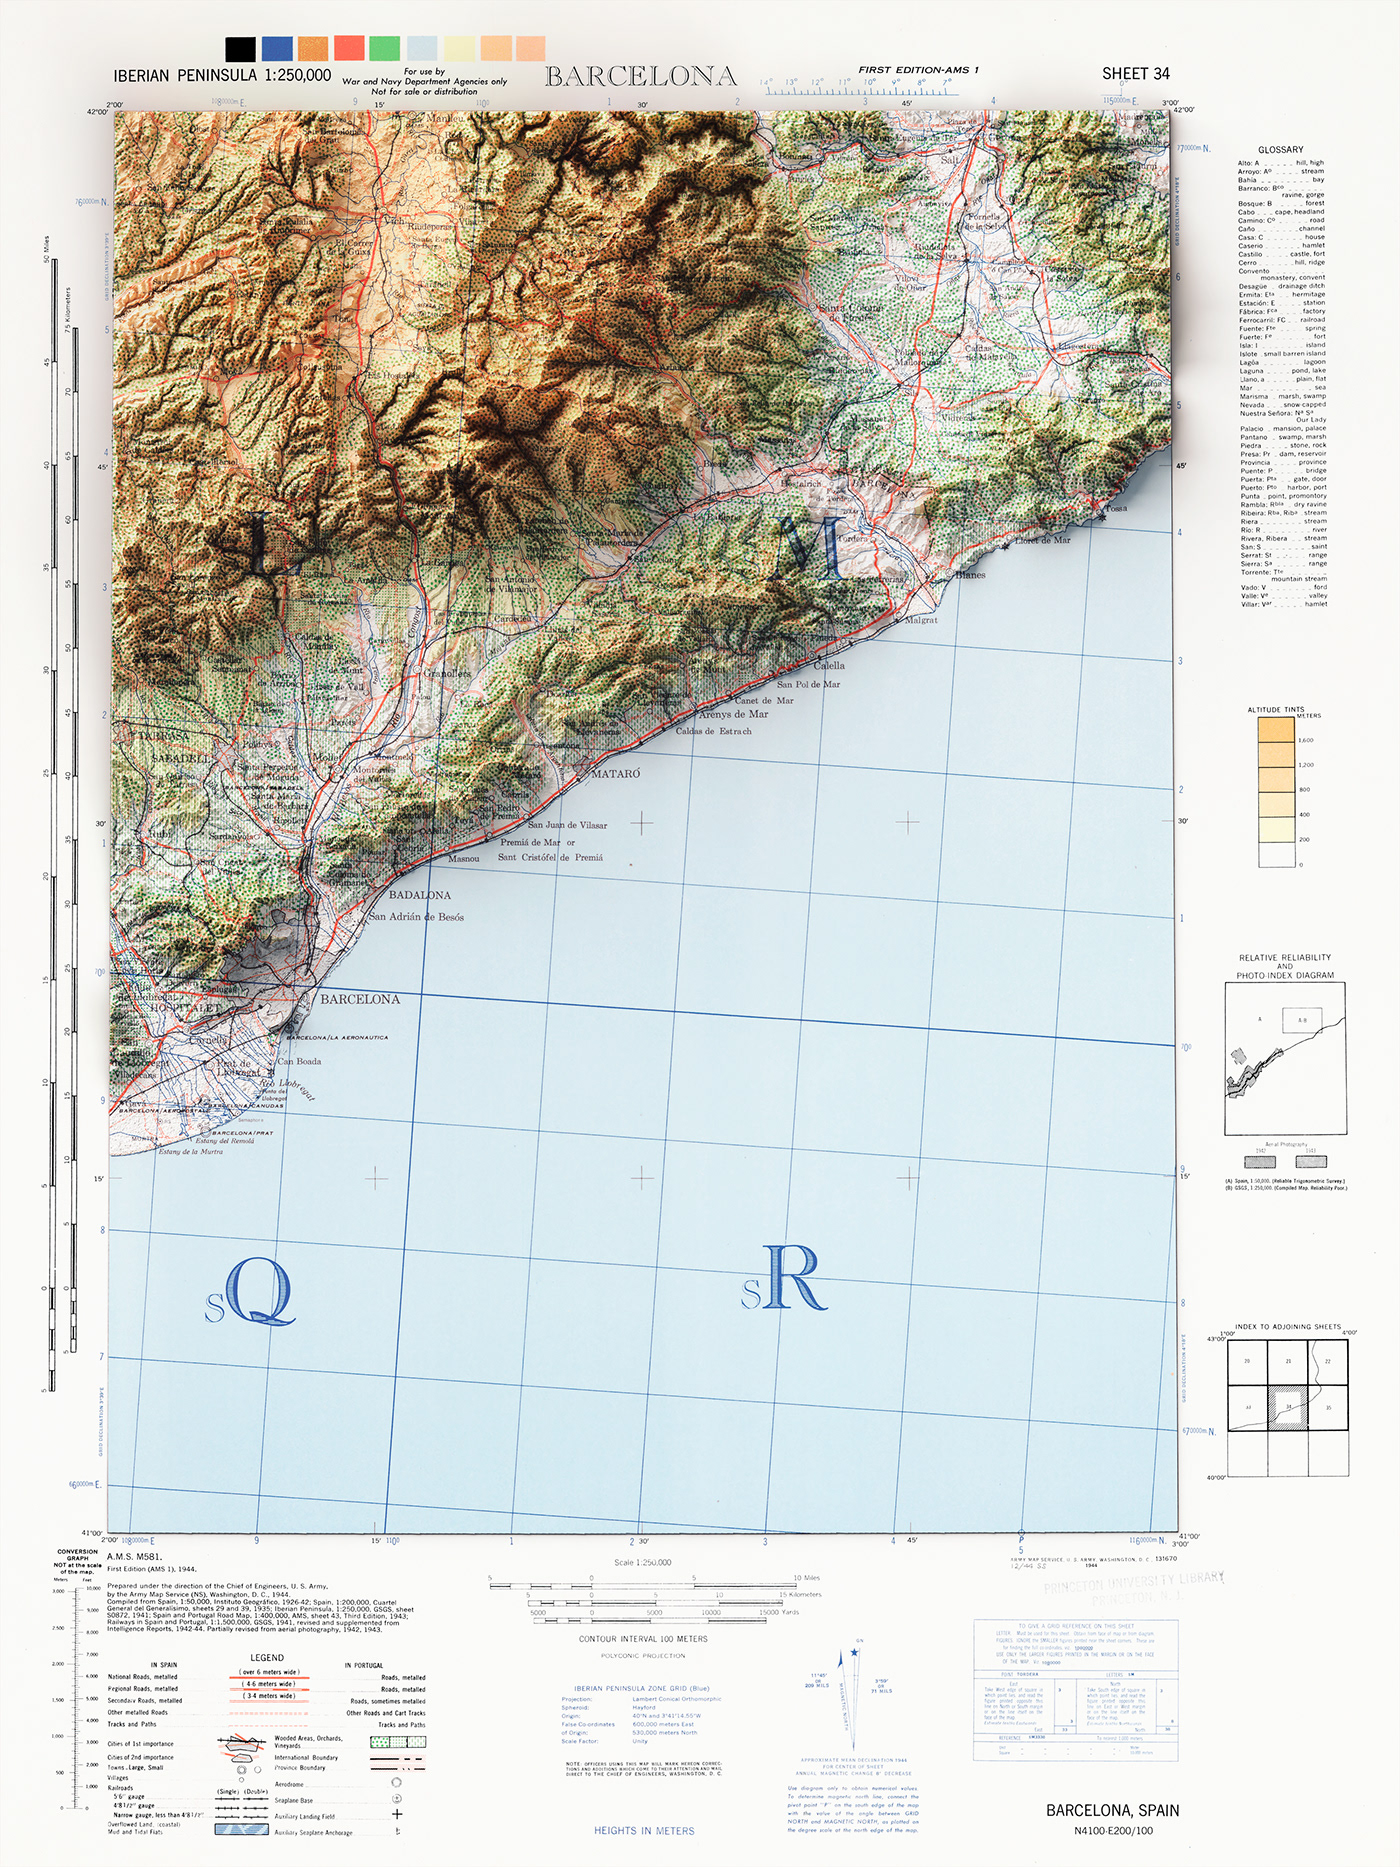 3d art cartography data visualization españa Geography information design print design  shaded relief spain topography